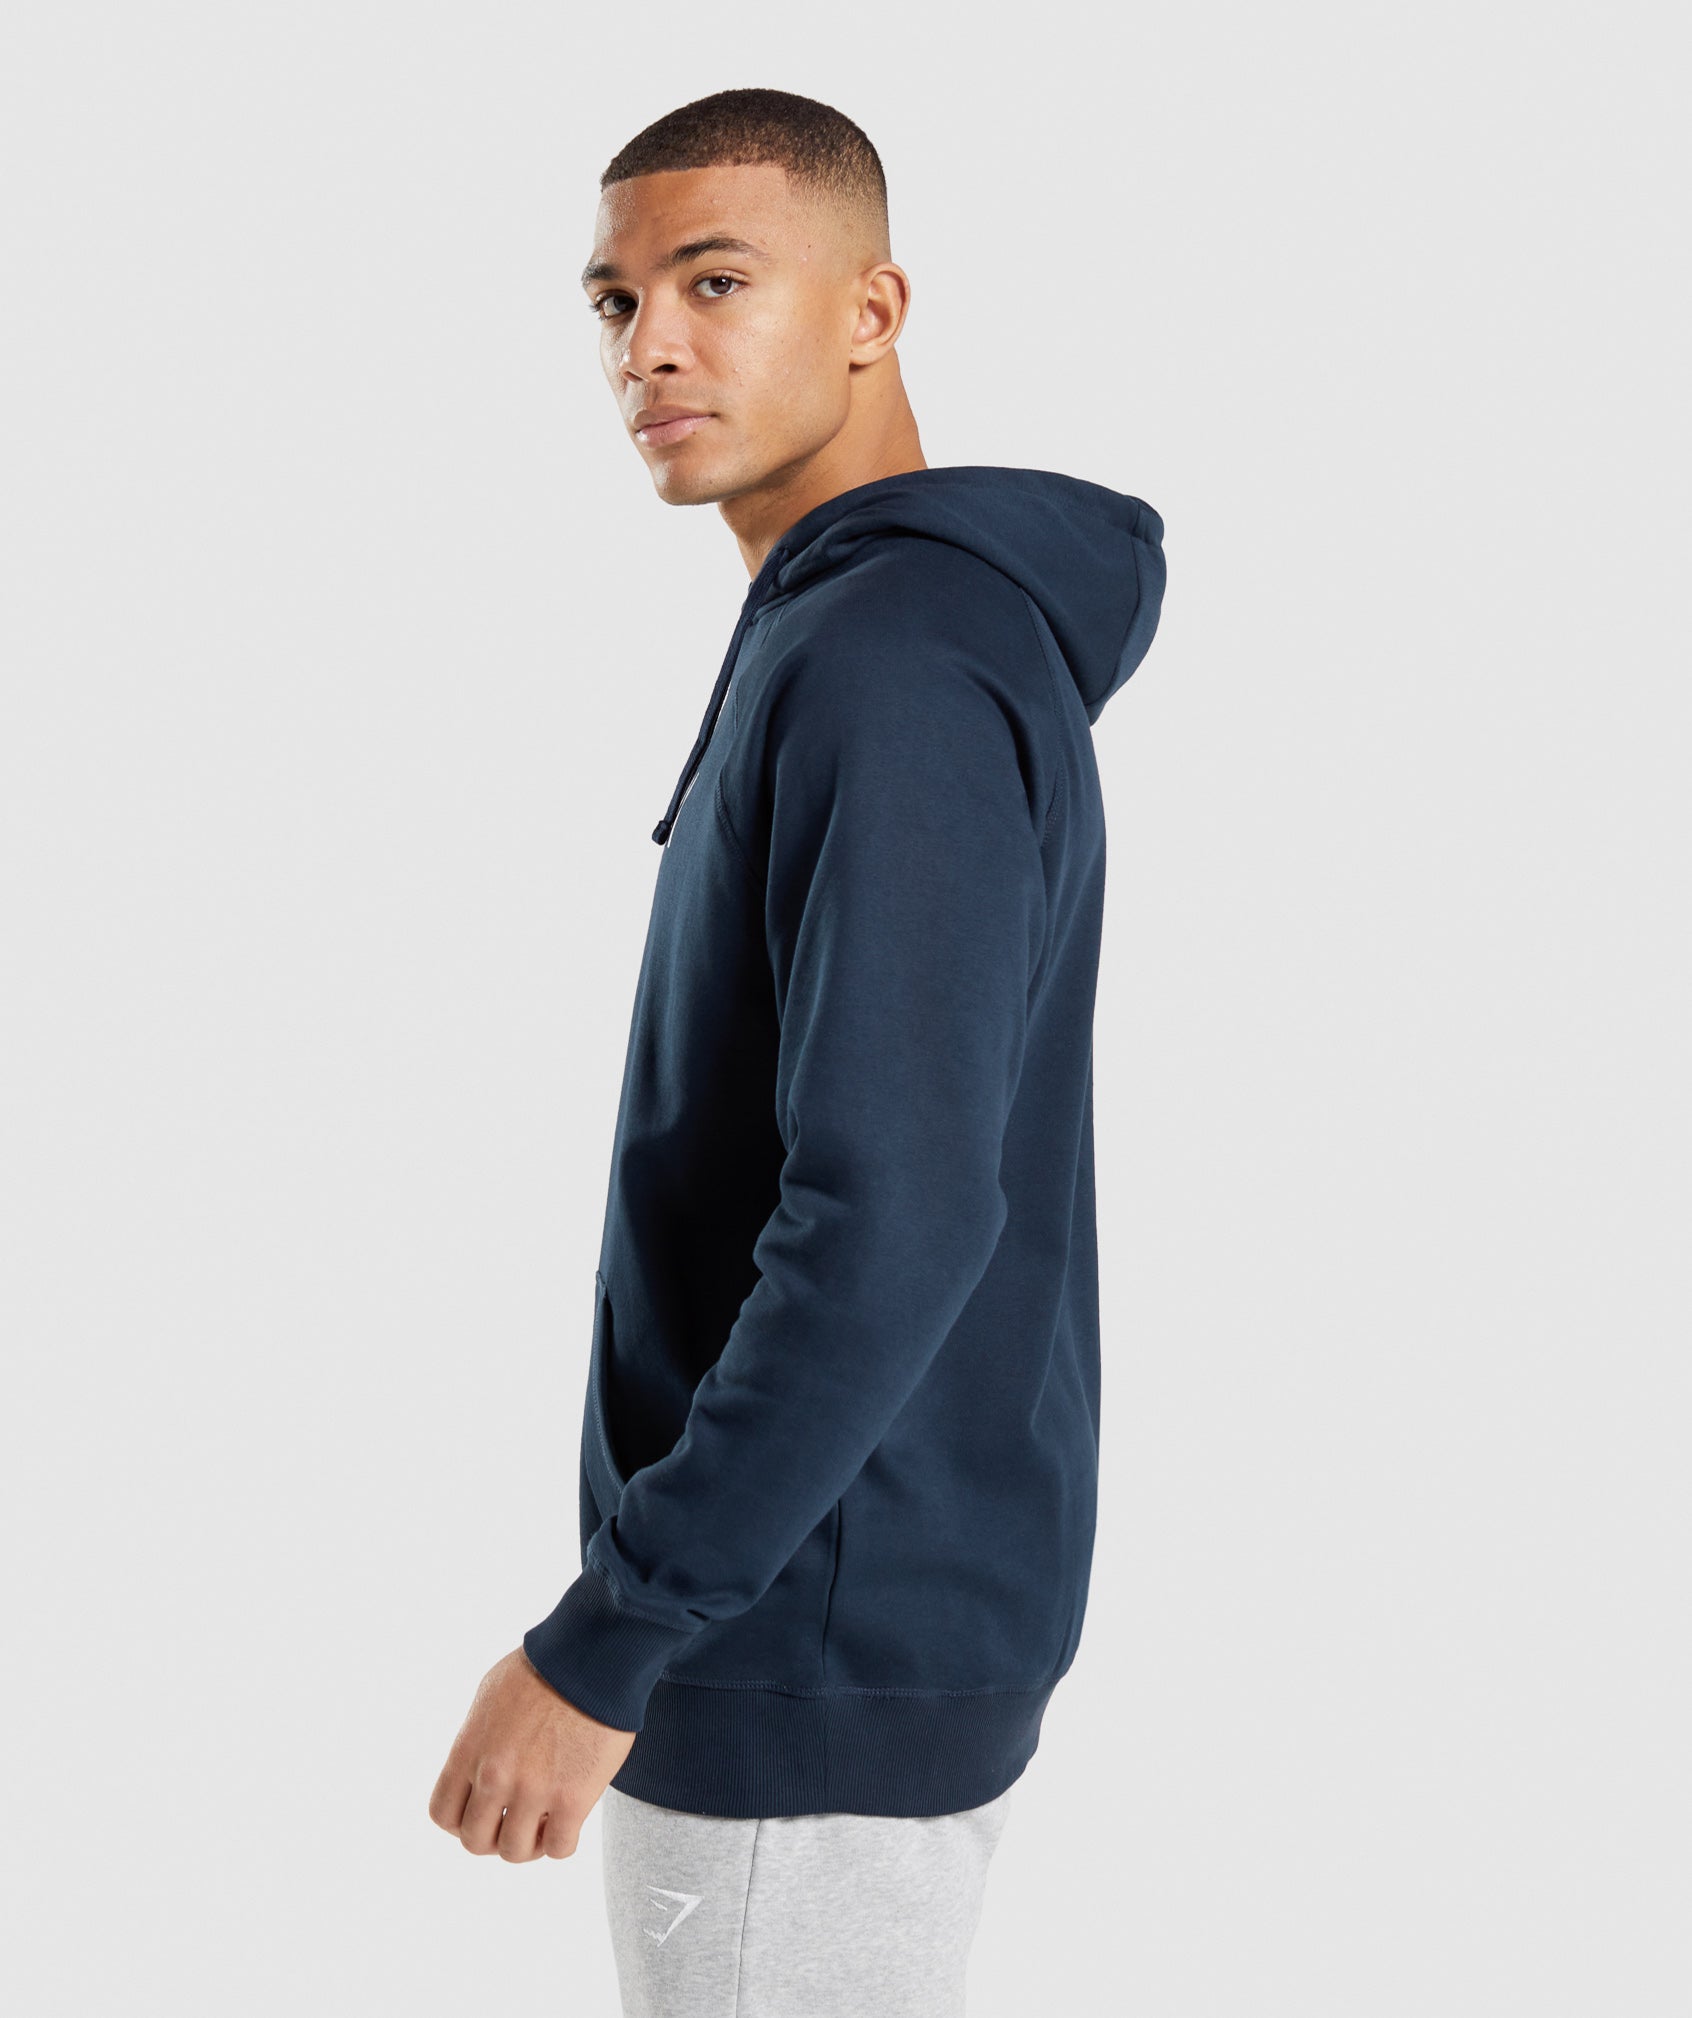 Apollo Hoodie in Navy